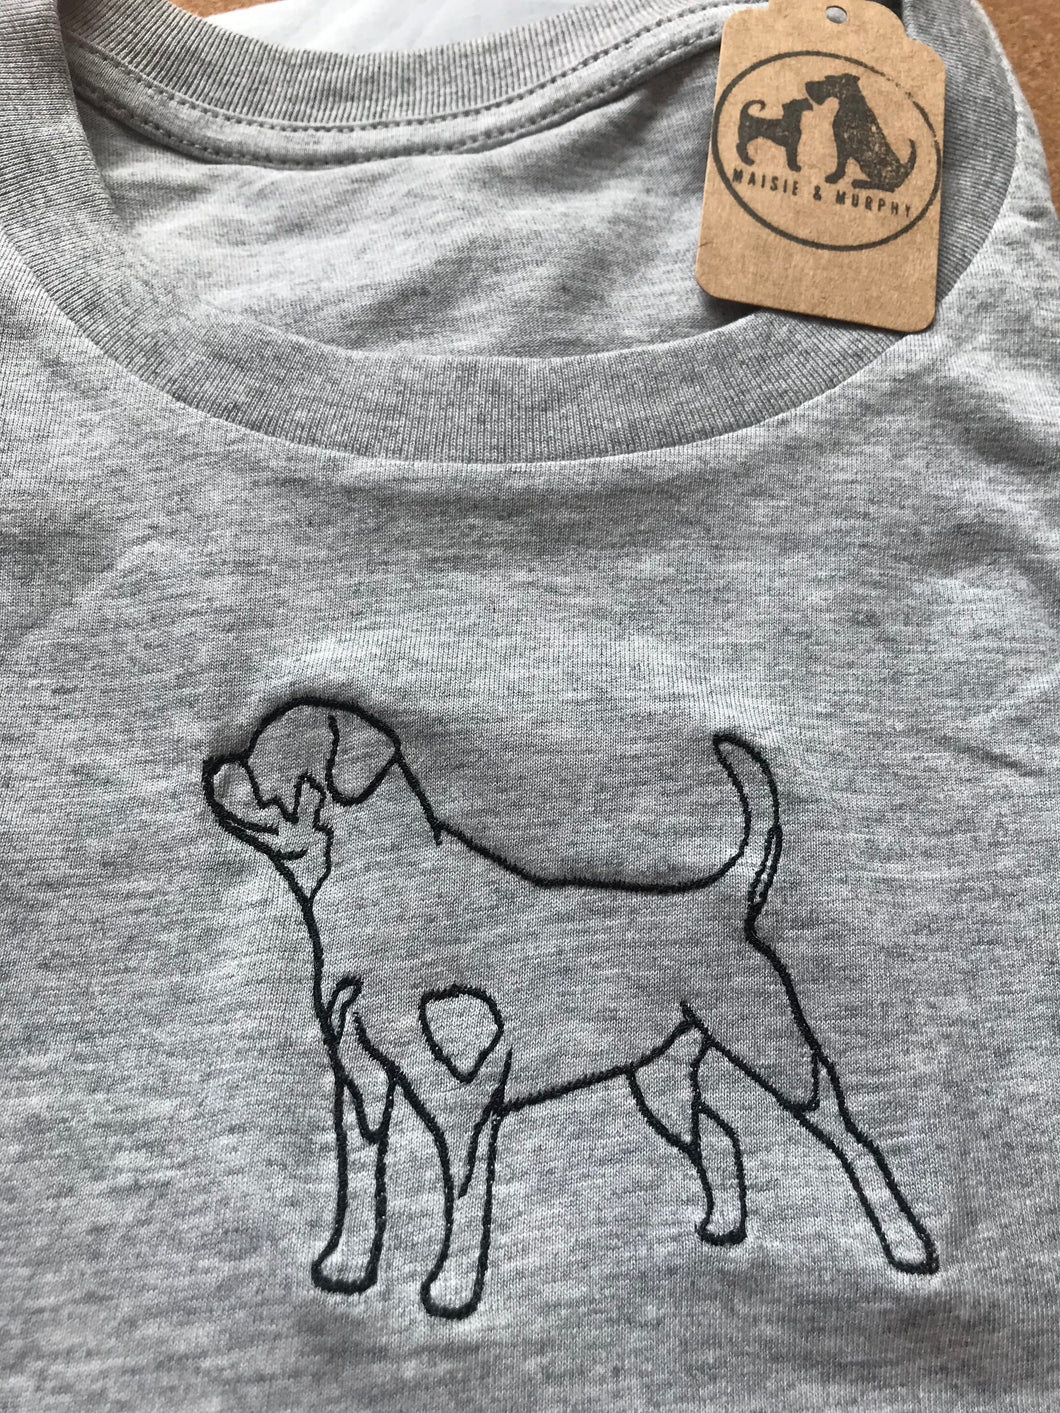 Embroidered Rottweiler  Silhouette Sweatshirt- Gifts for Rottie lovers and owners